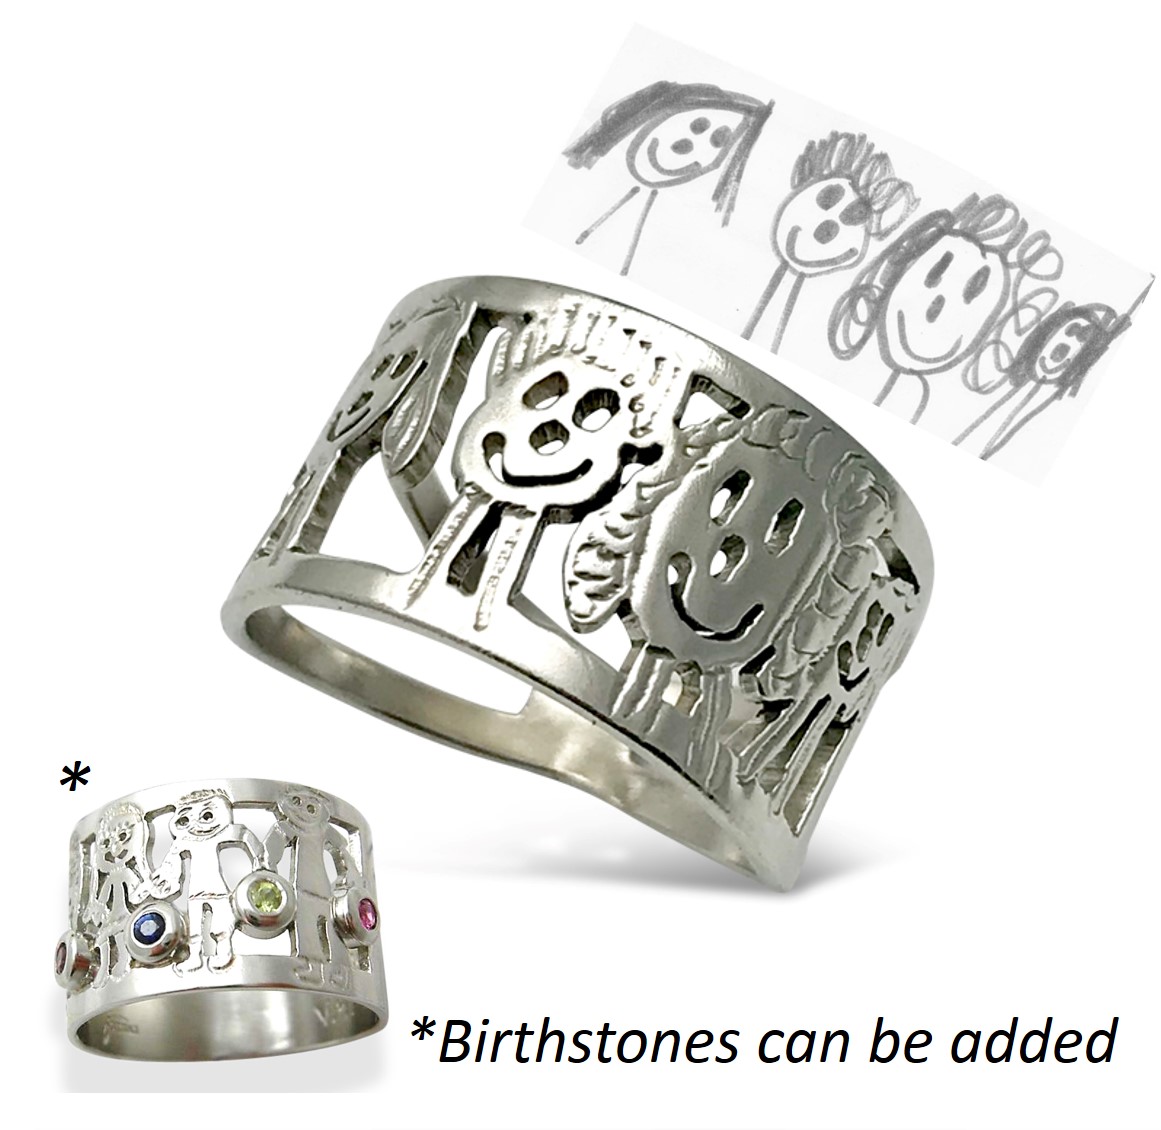 family ring from kids artwork with birthstone options